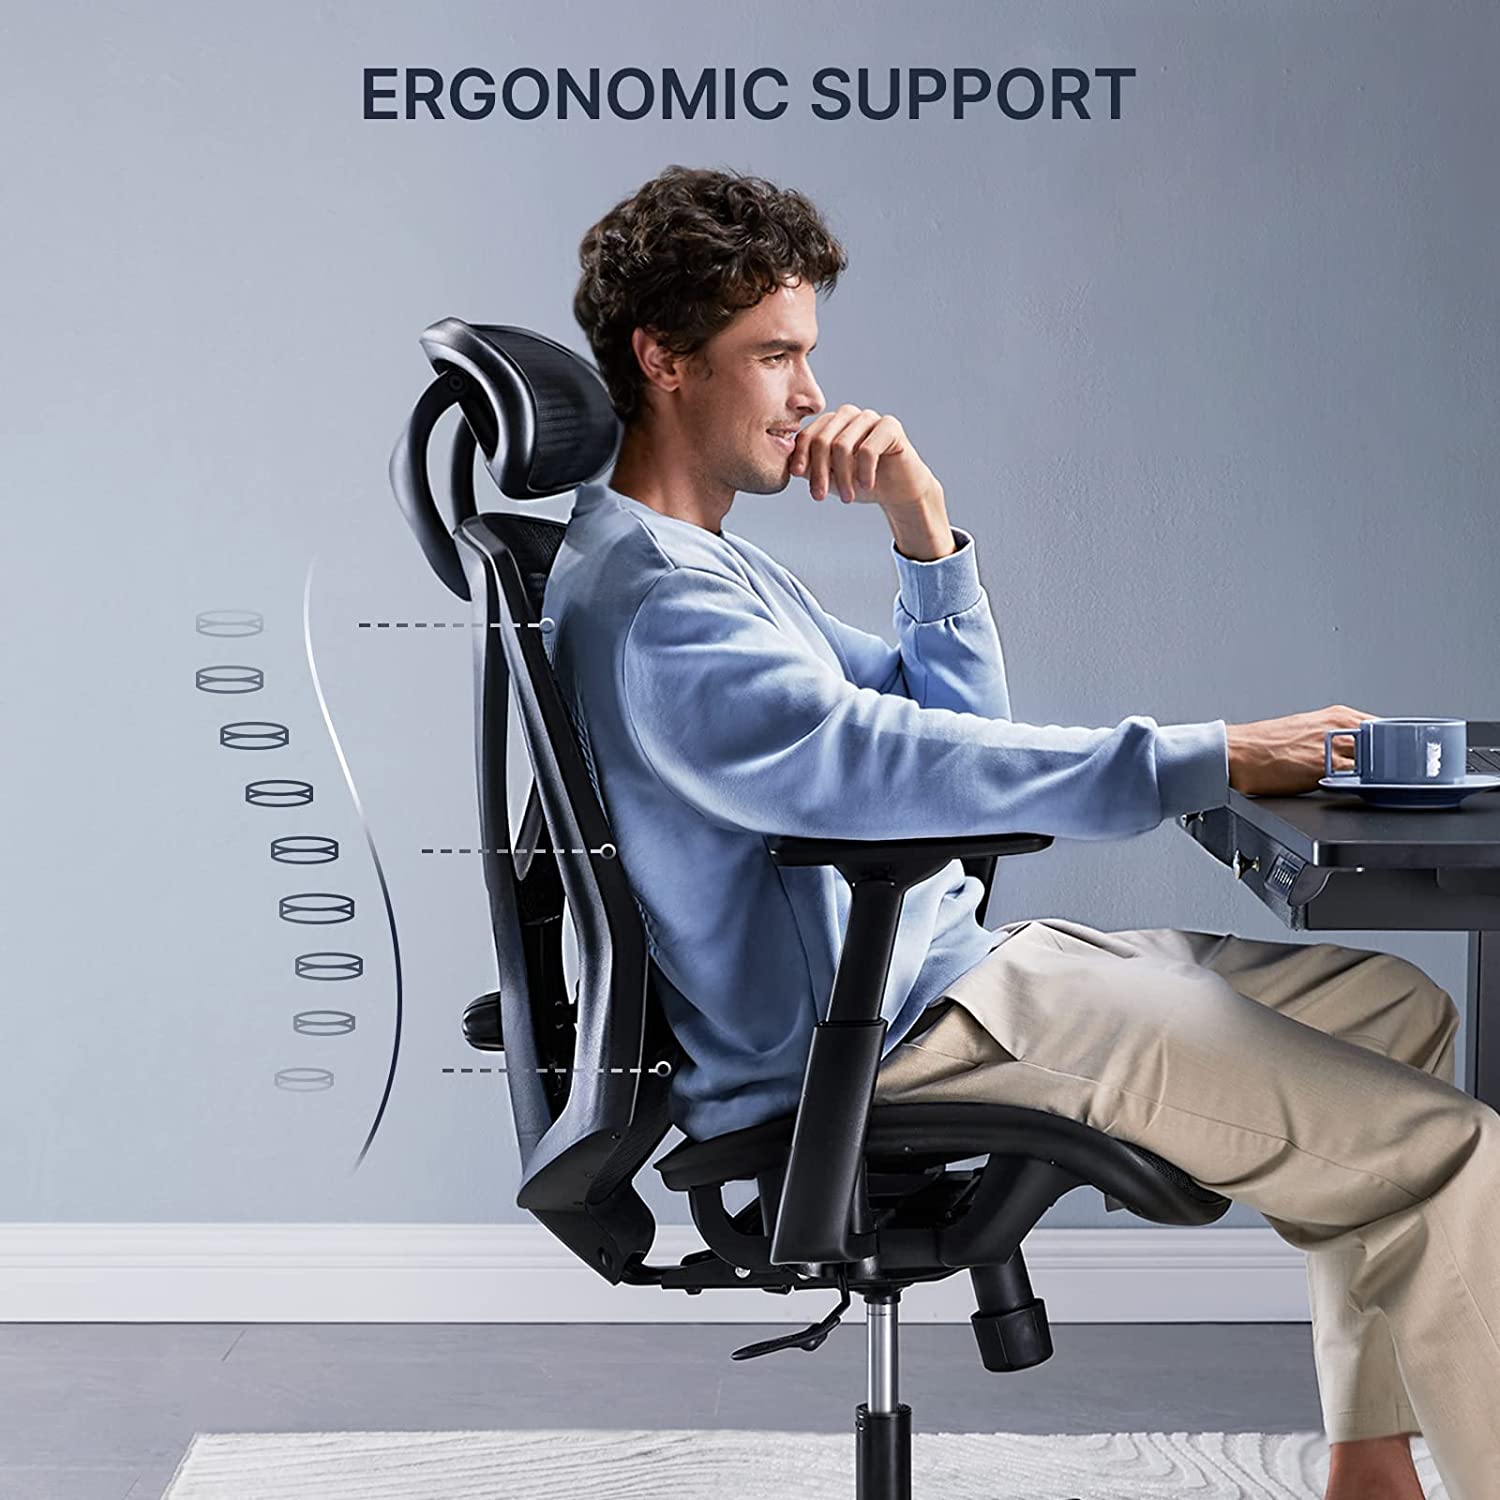 Where to Put Lumbar Support in an Office Chair?